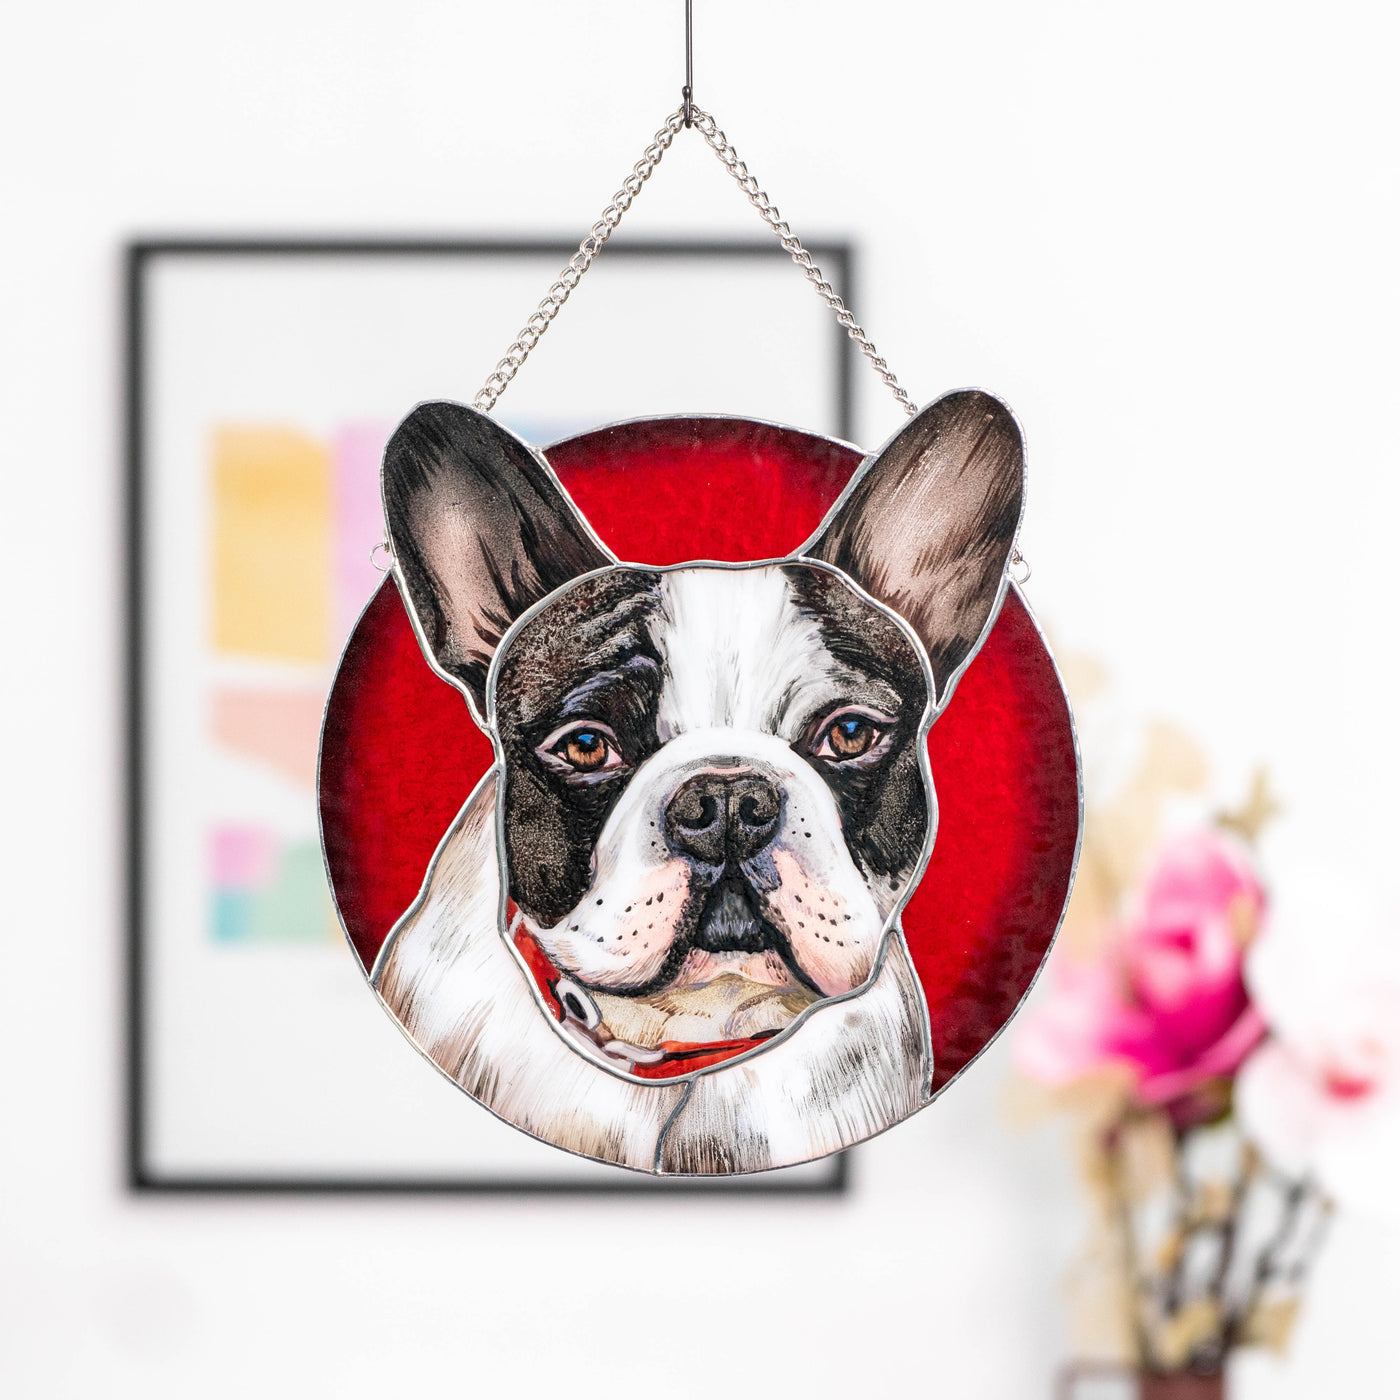 Stained glass hand-painted round dog portrait 